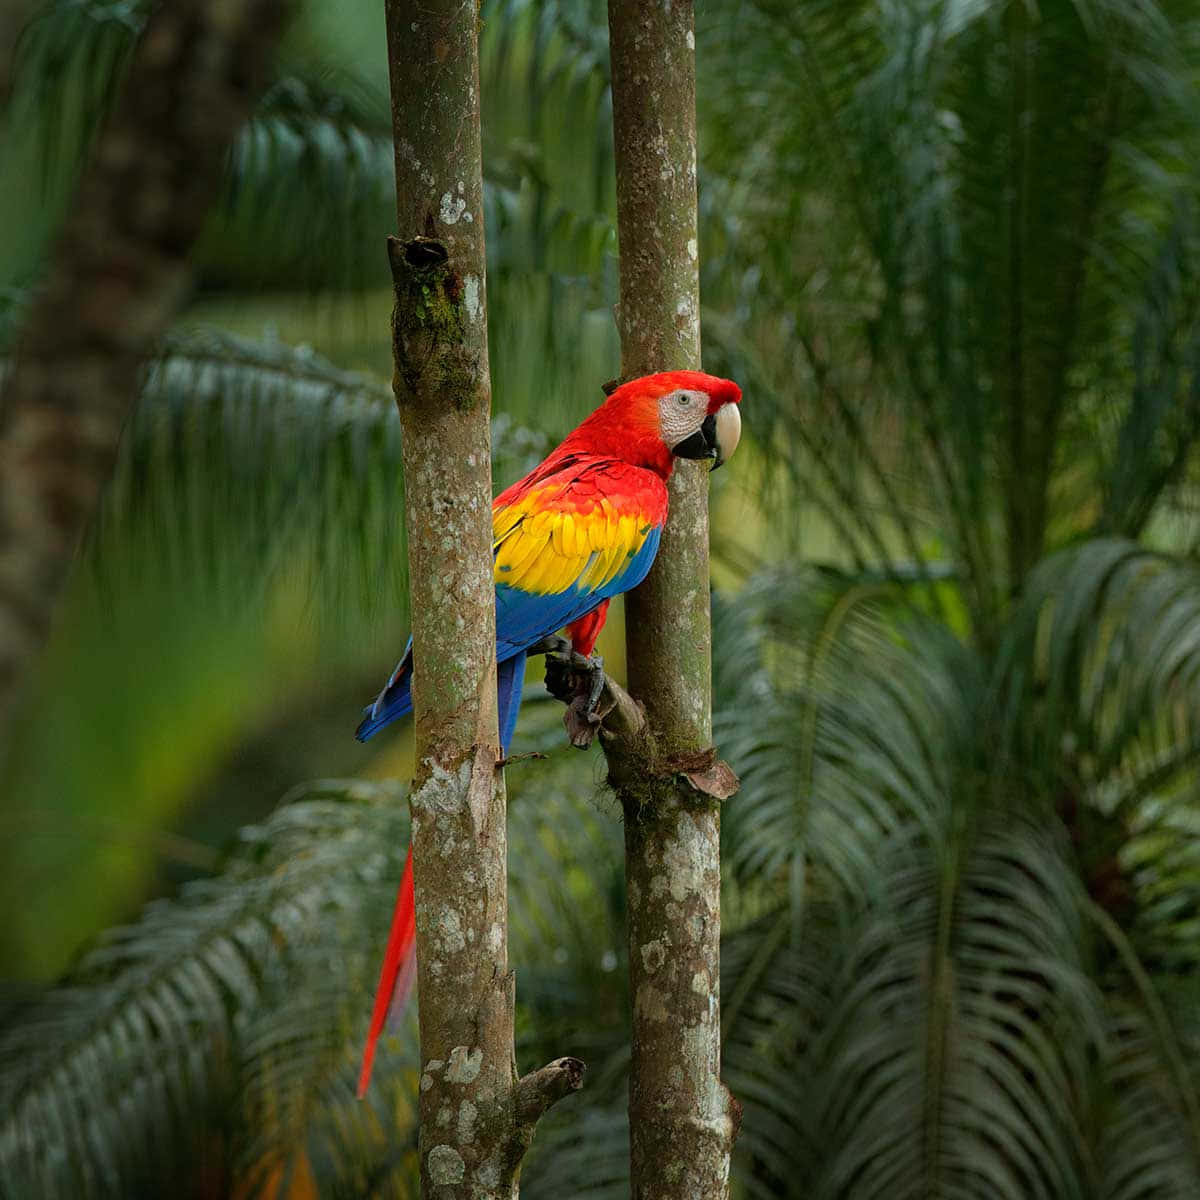 "A beautiful parrot taking flight in a jungle oasis"